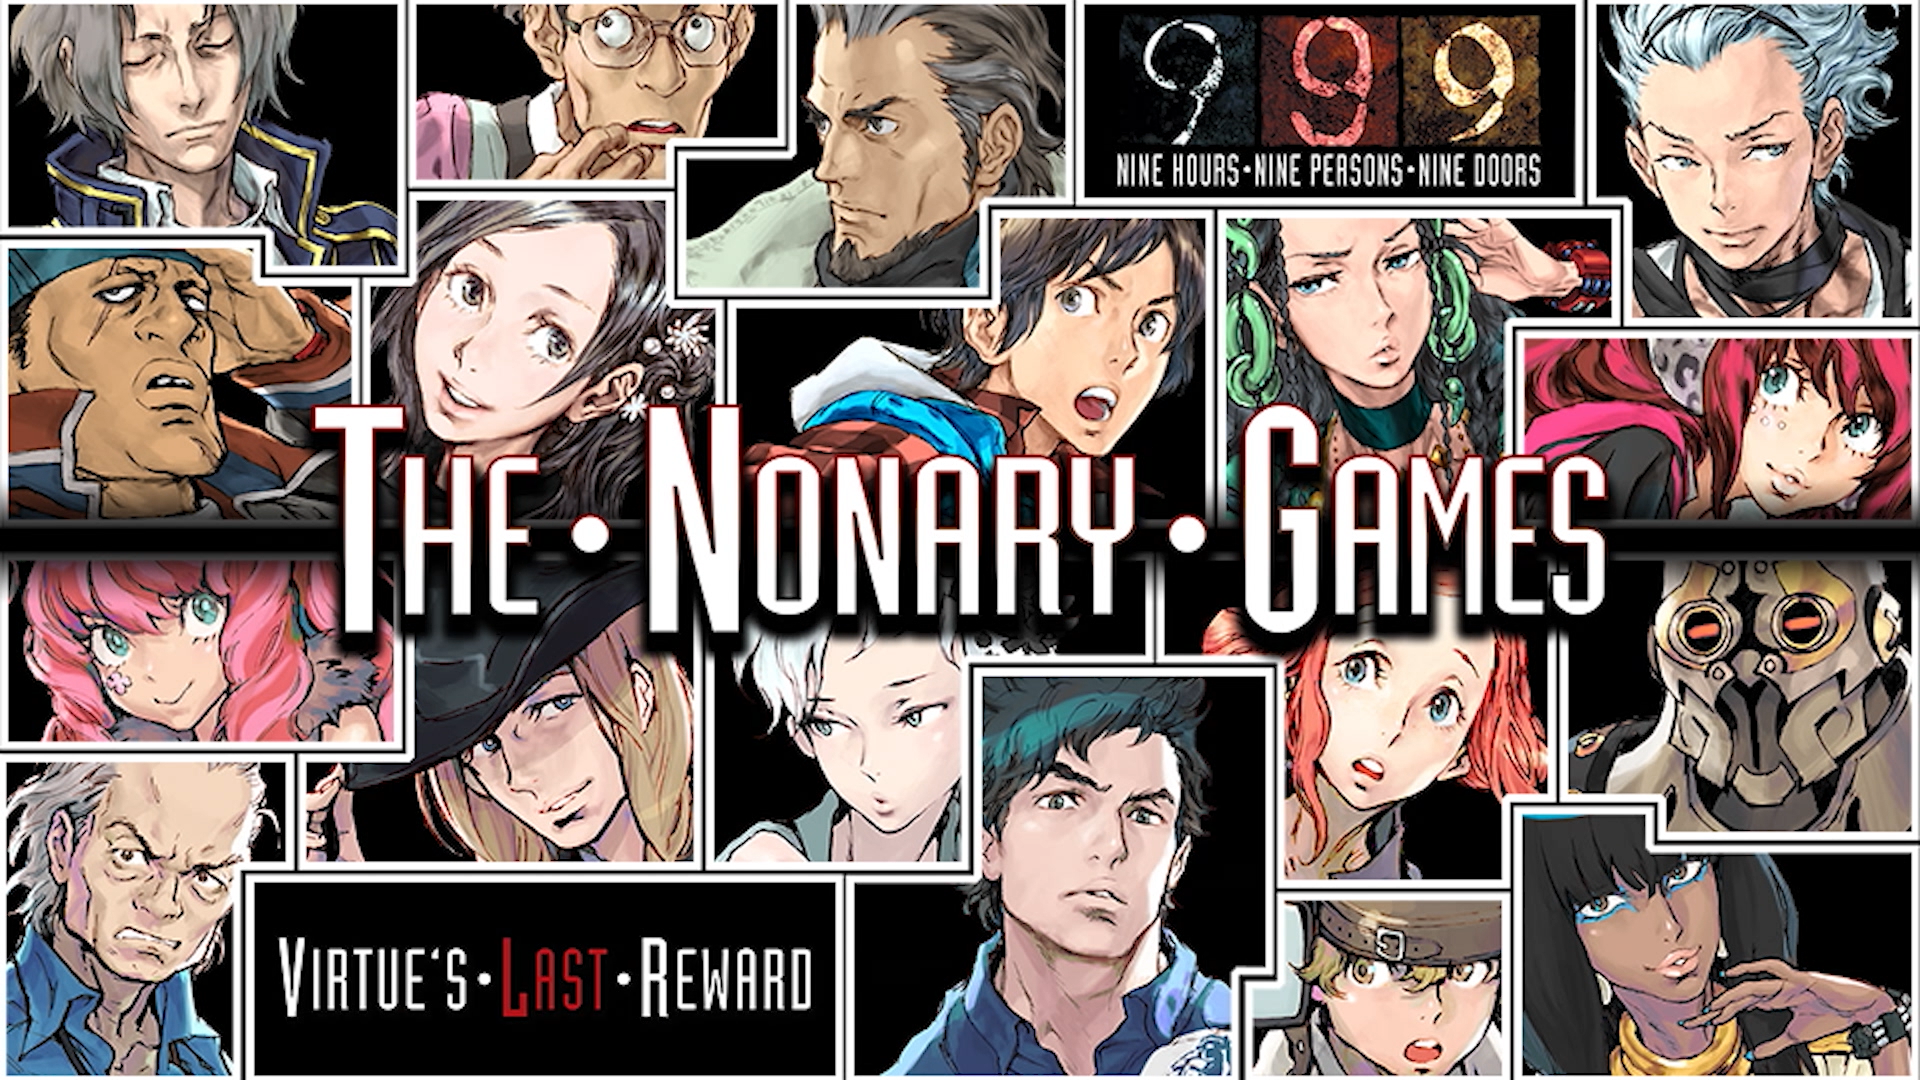 https://www.spike-chunsoft.com/news/zero-escape-the-nonary-games-available-now-for-xbox-one-and-windows-10/